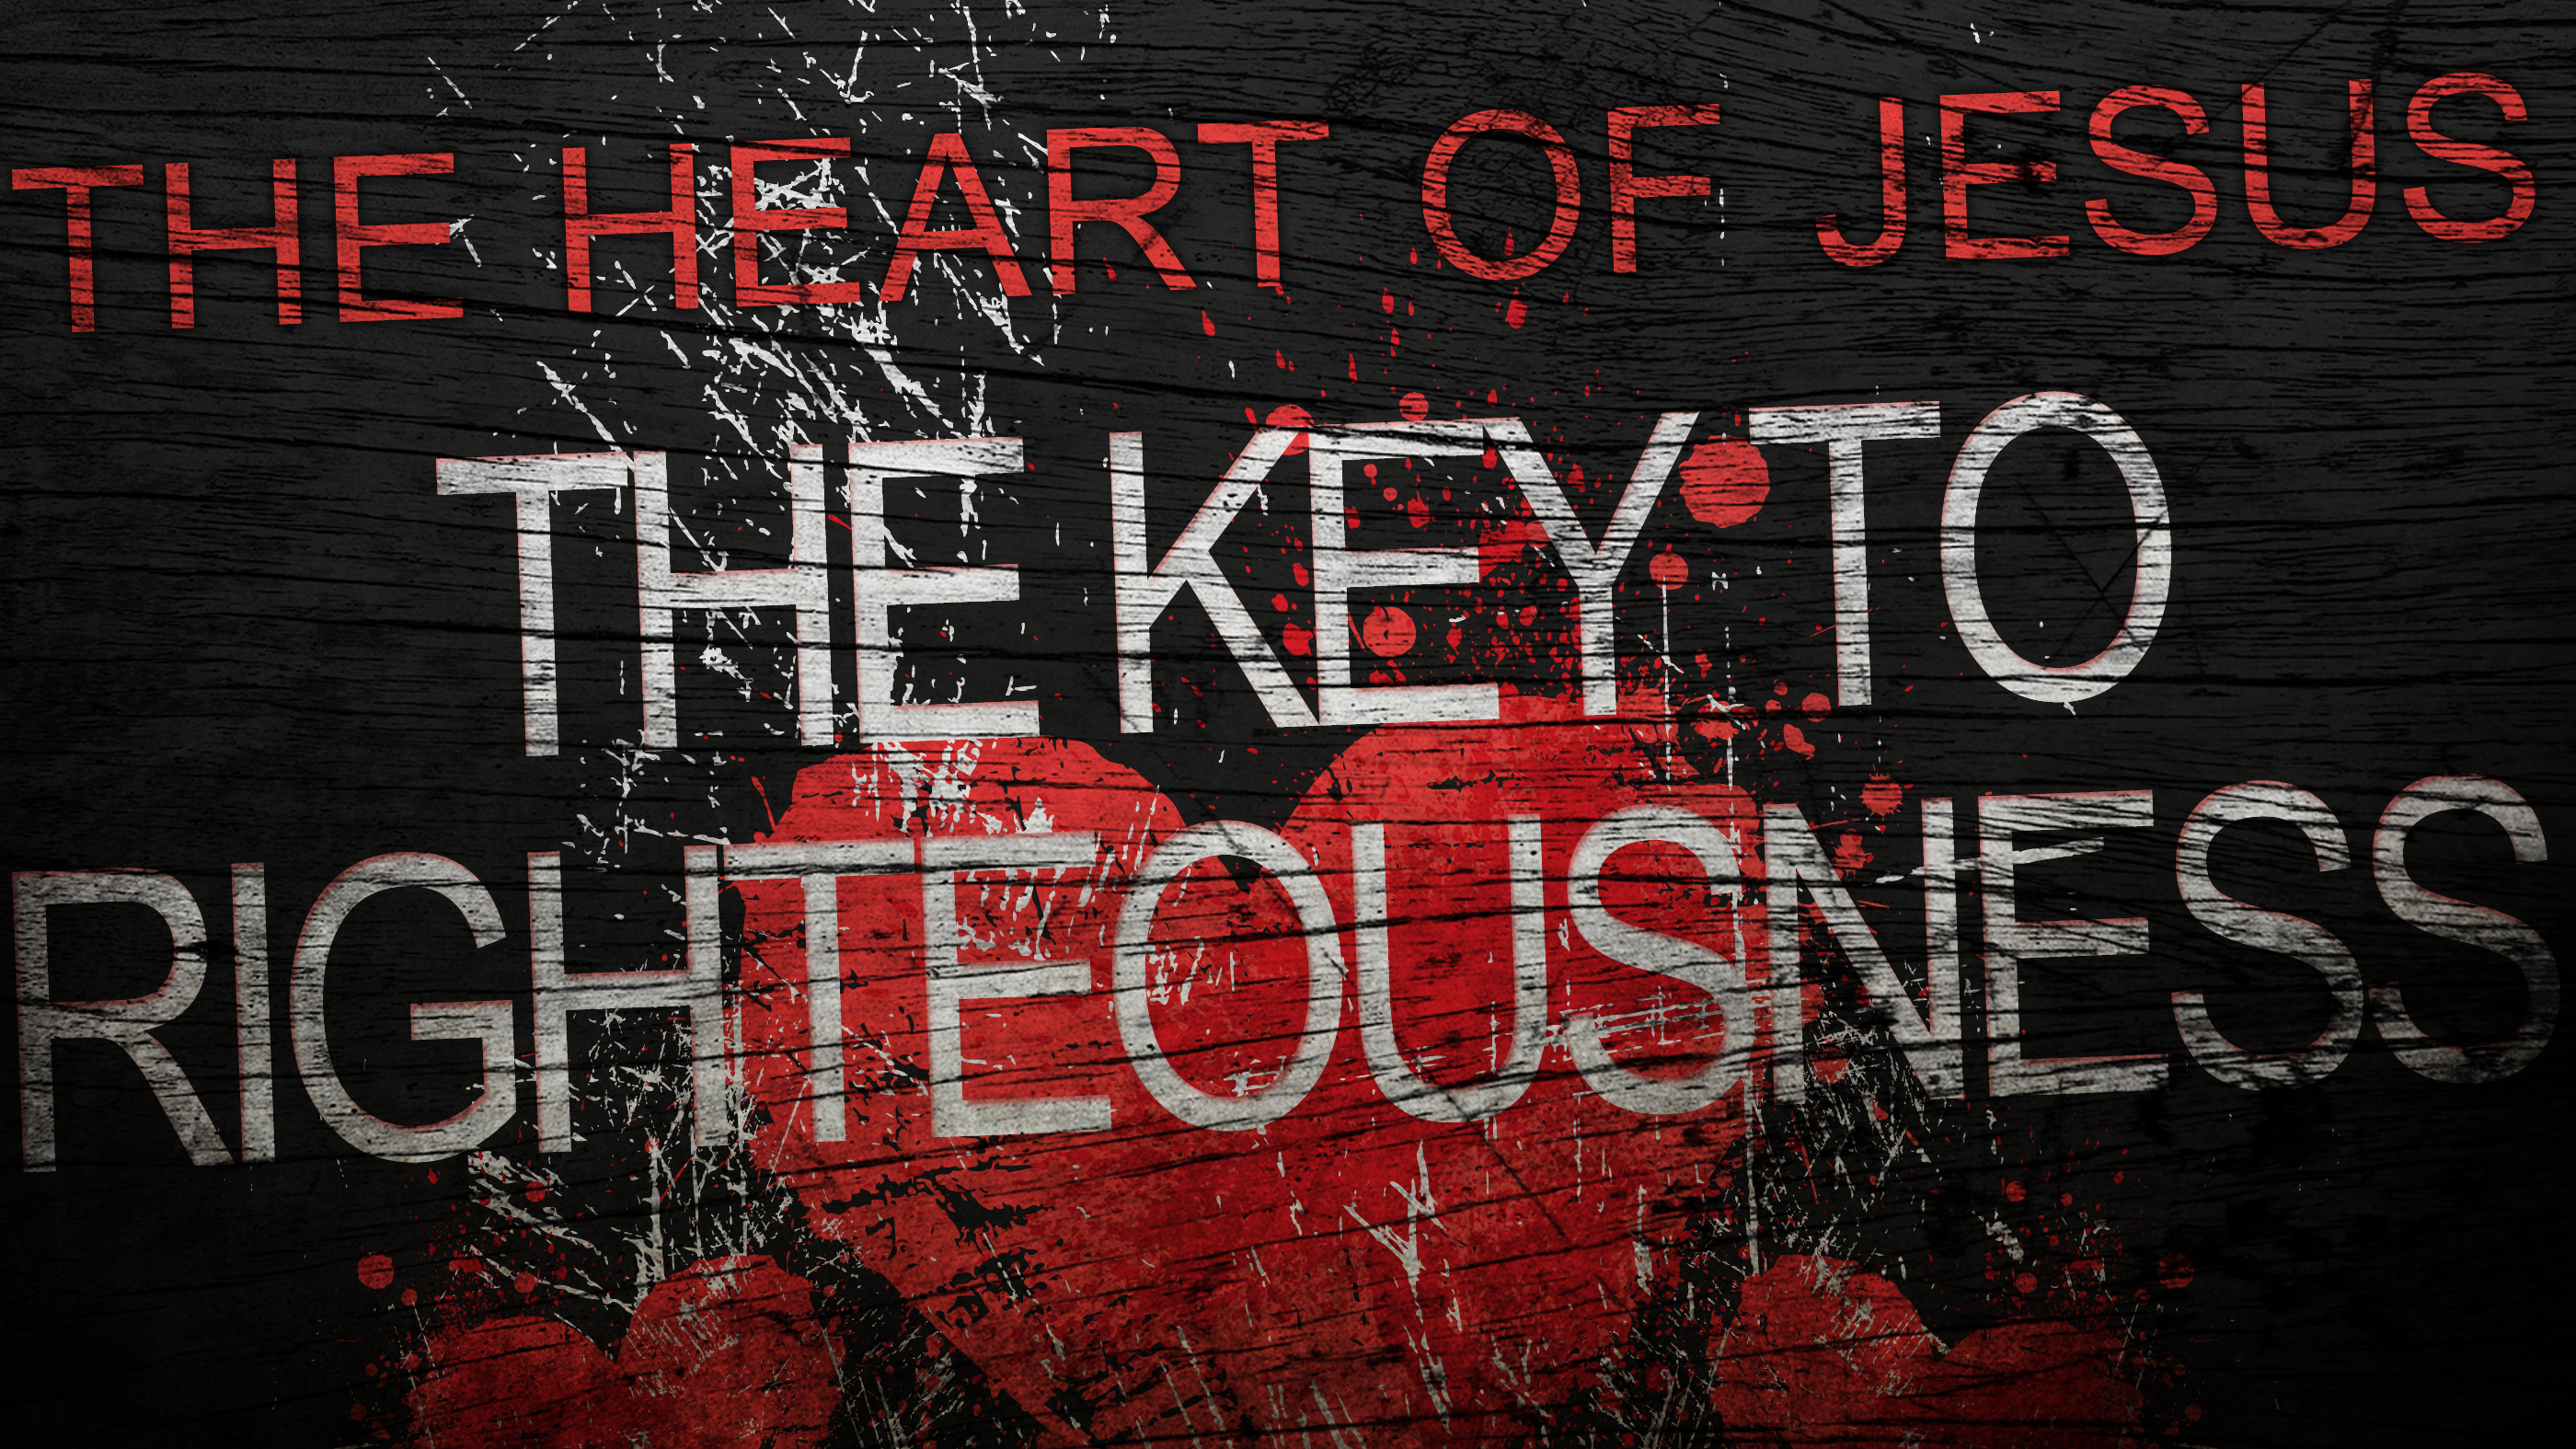 The Key to Righteousness